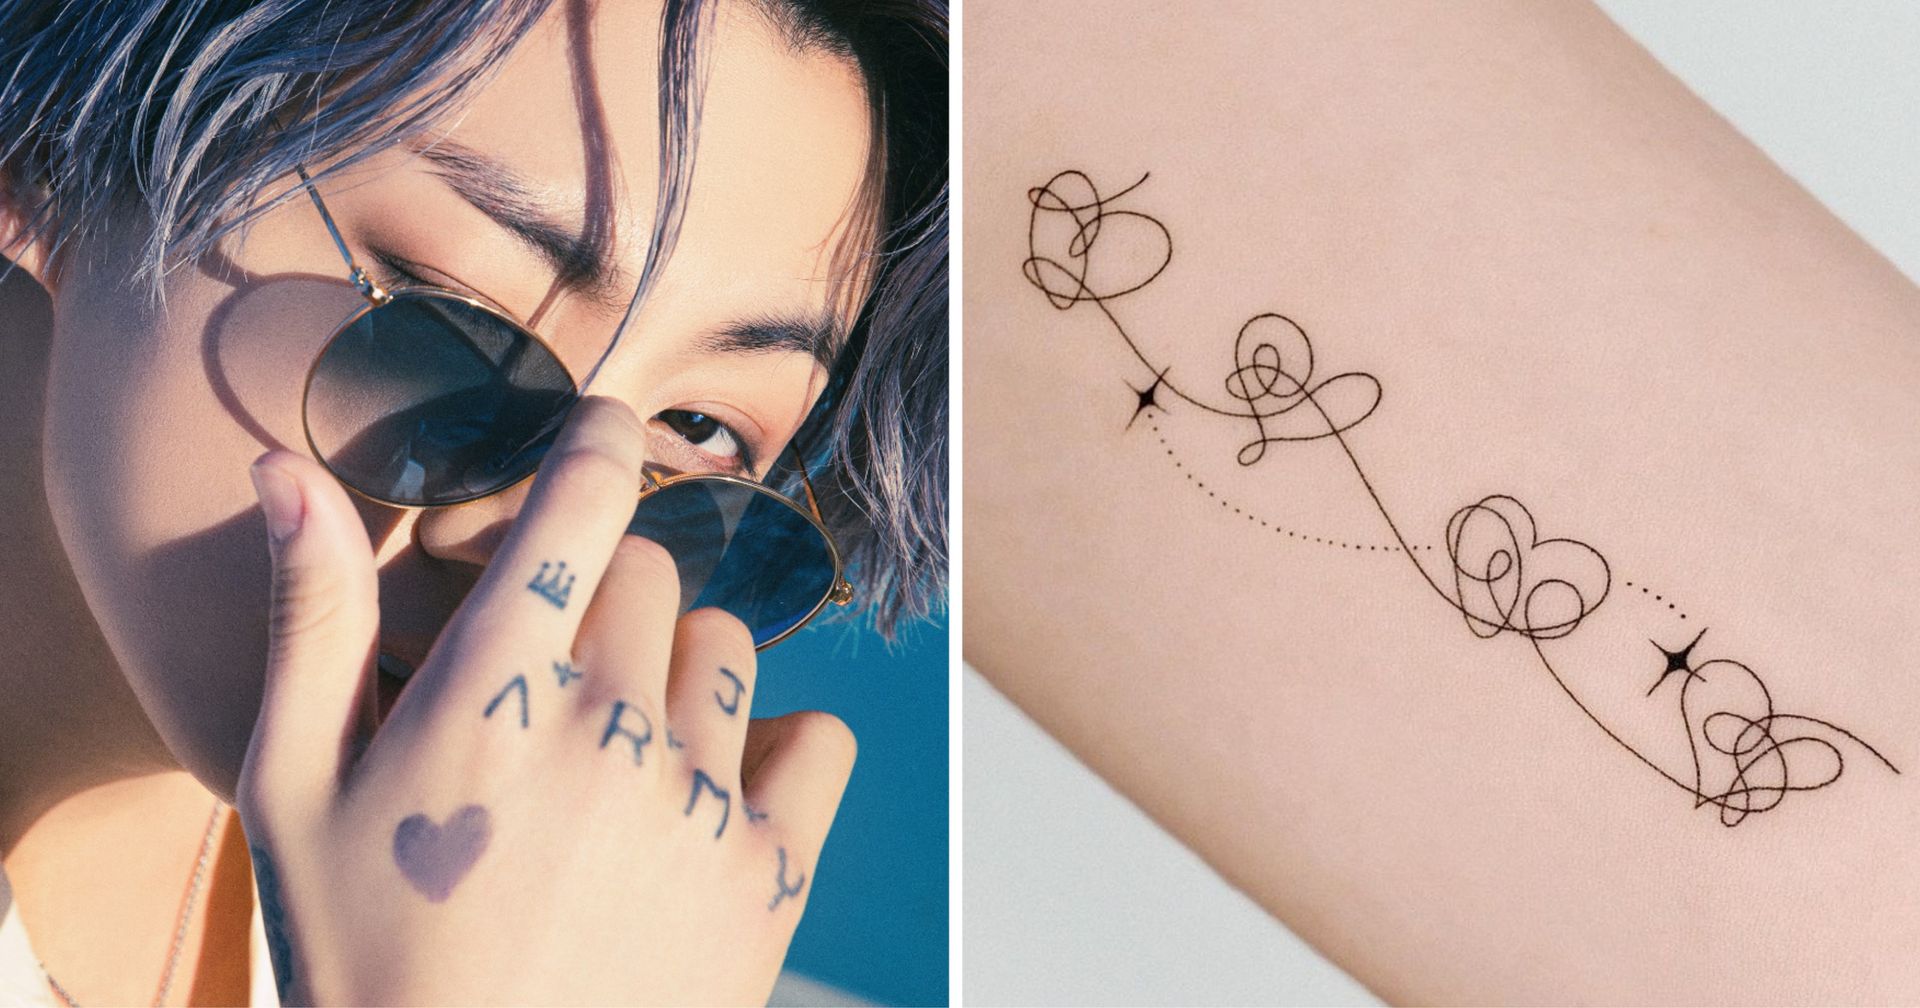 𝐋𝐨𝐯𝐞 𝐦𝐲𝐬𝐞𝐥𝐟 🤍 This is your sign to get a bts tattoo 🫶🏻 #b... |  TikTok